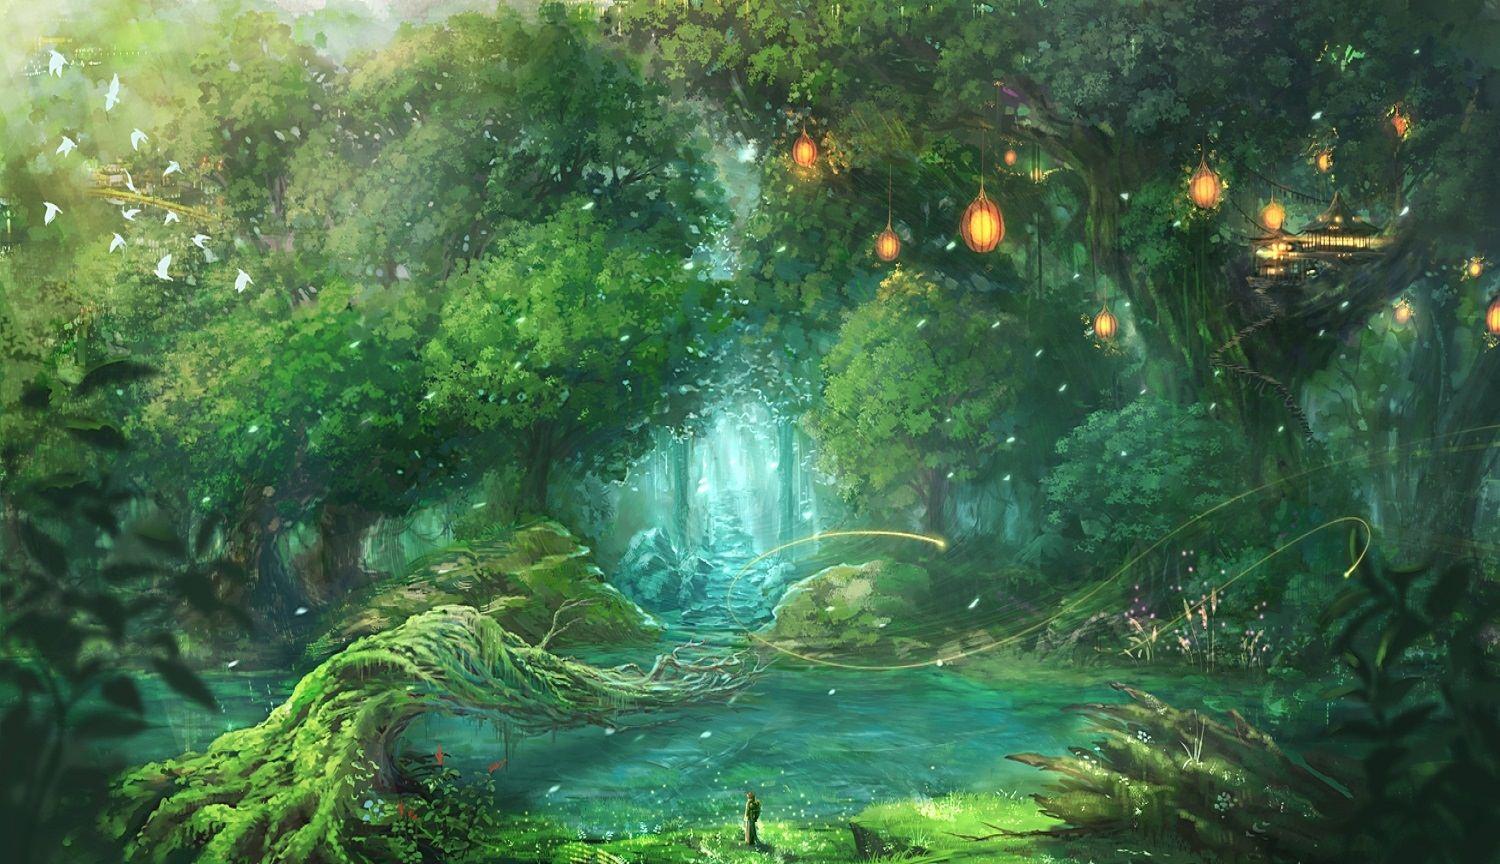 Magical Wallpaper, Mystical Background, Picture, Image